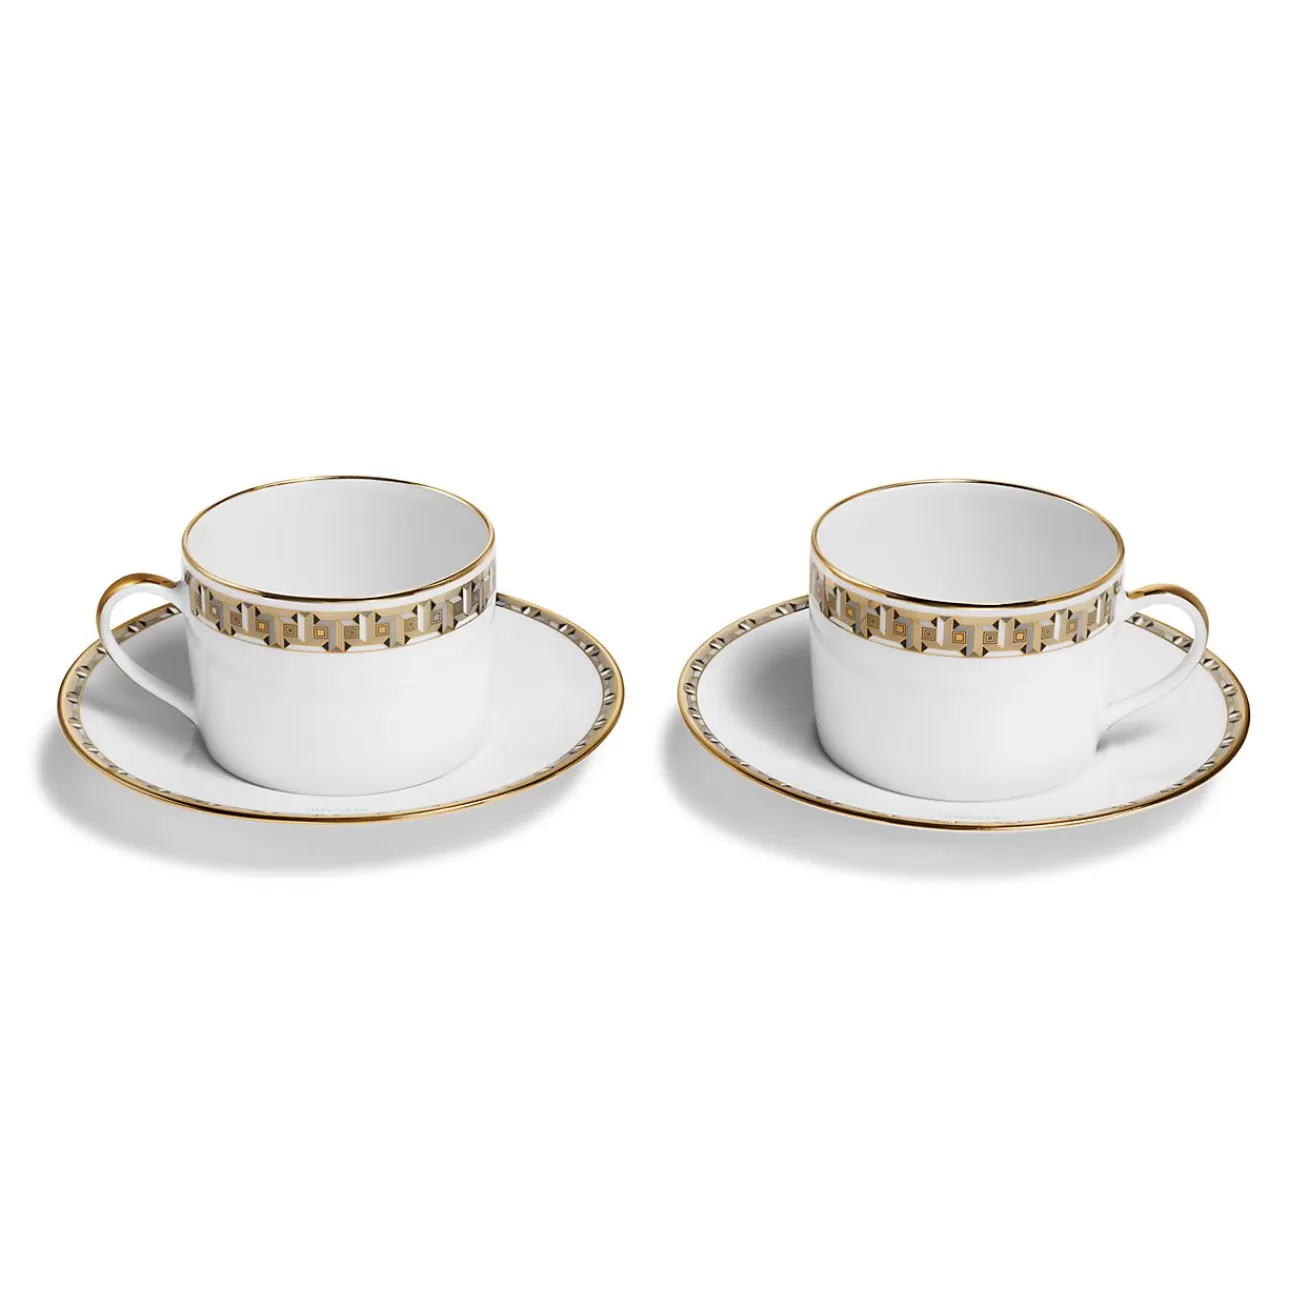 Tiffany & Co. Black Tiffany T True Cup and Saucer Set of Two, with Gold Rims | ^ Business Gifts | Tableware